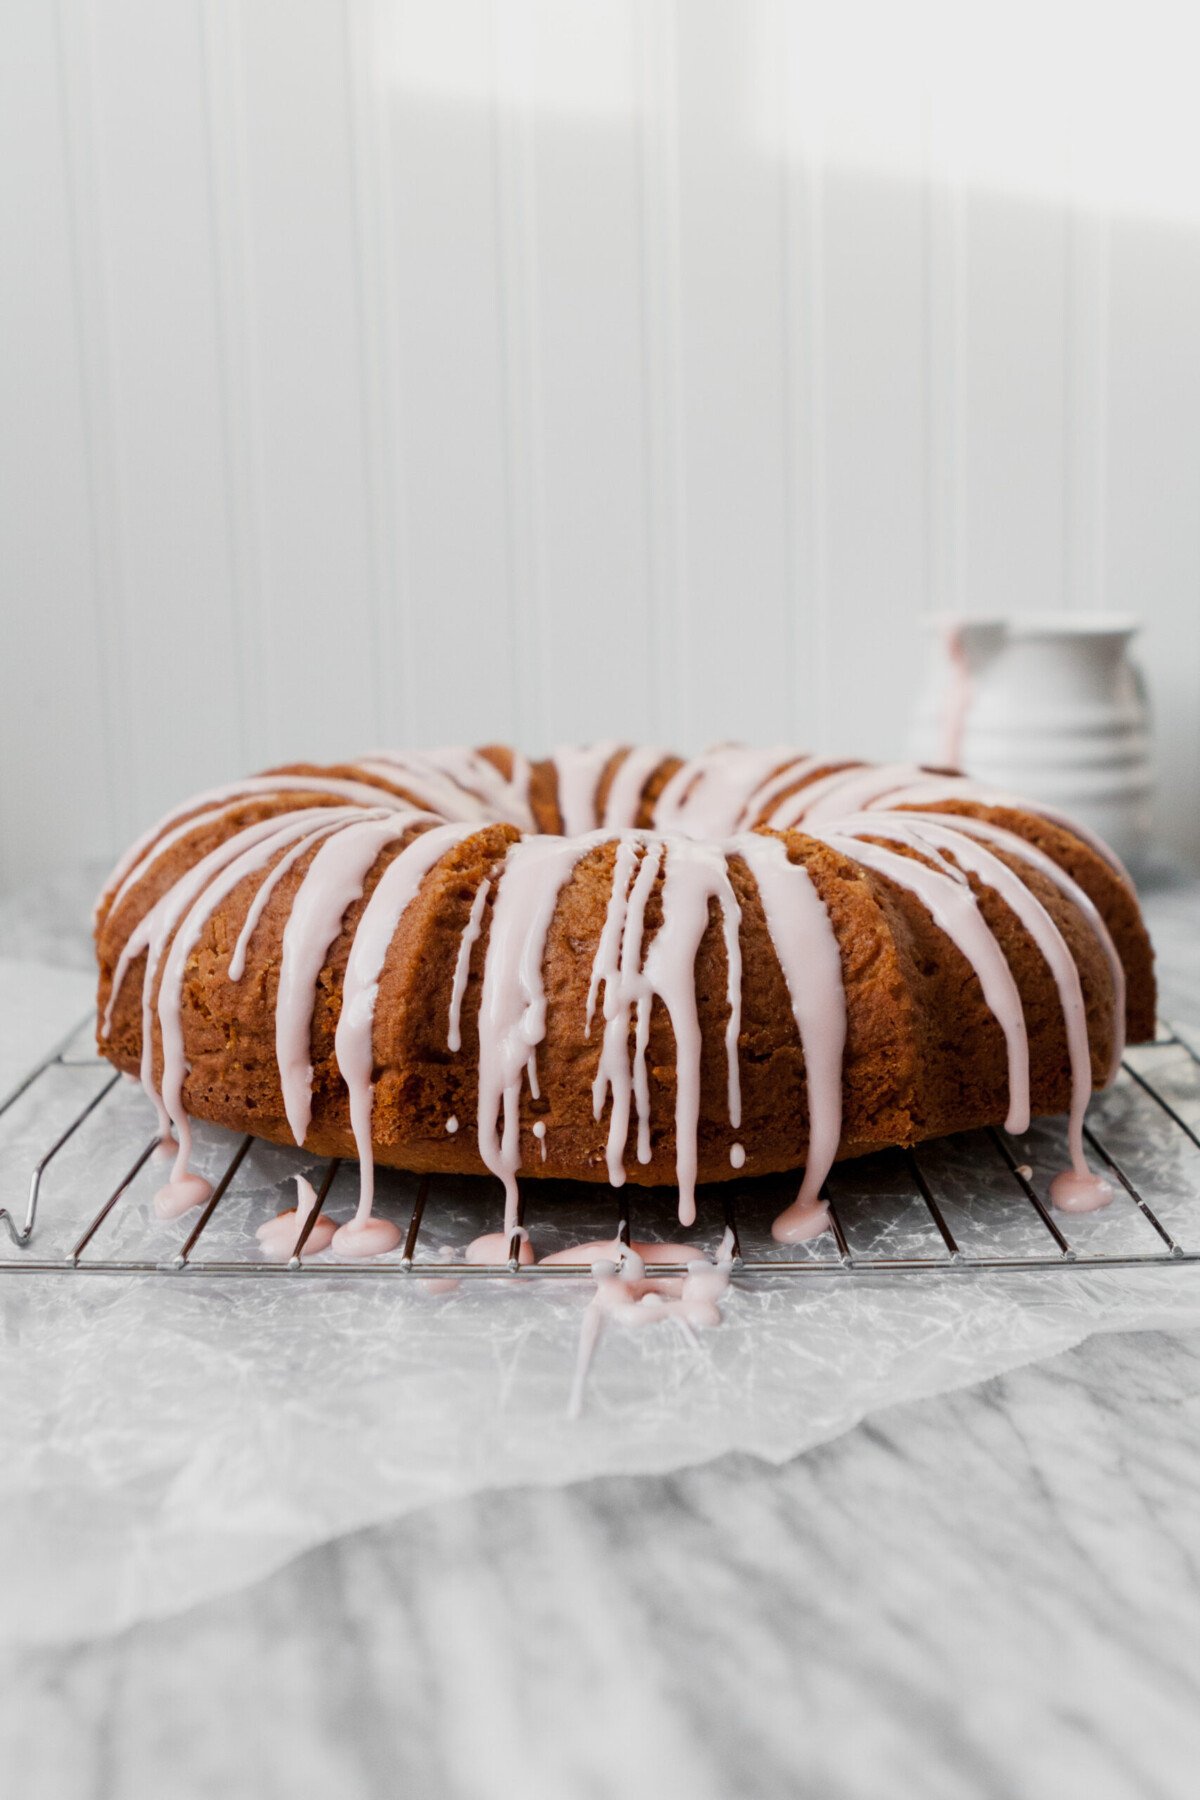 Tender bundt cake flavored with fresh grapefruit and Campari. This cake is naturally sweetened with honey, easy to whip, and elegant enough for a fancy party. | from Lauren Grant of Zestful Kitchen 